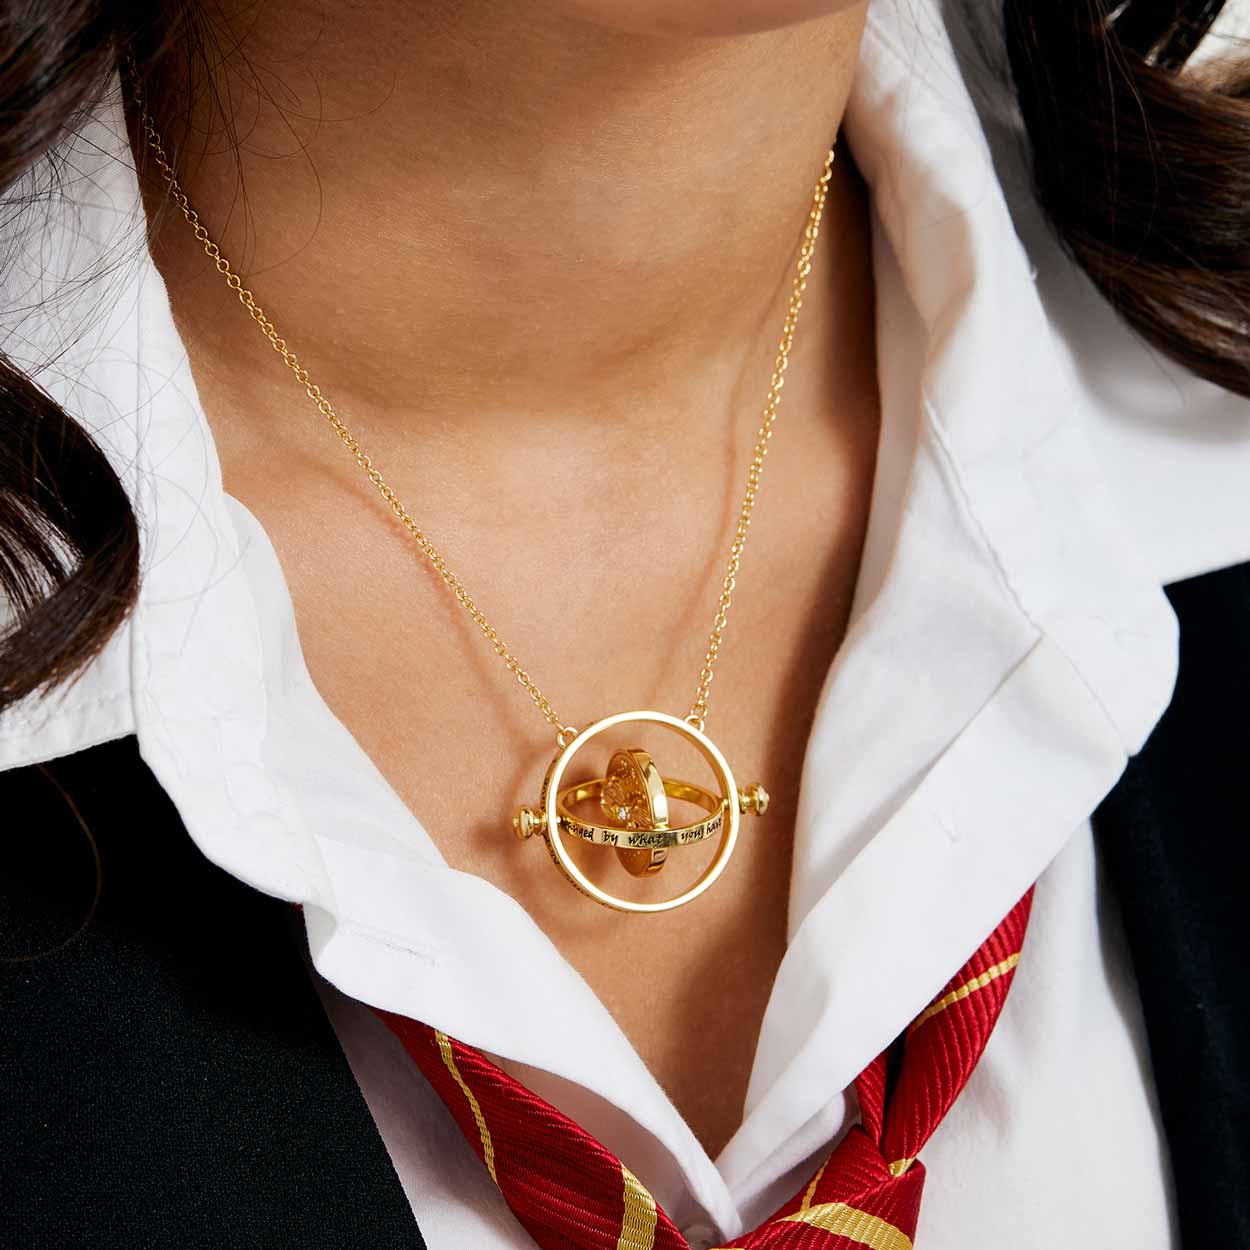 Harry Potter Hermione Granger Rotating Time Turner Necklace Hourglass Chain  | eBay